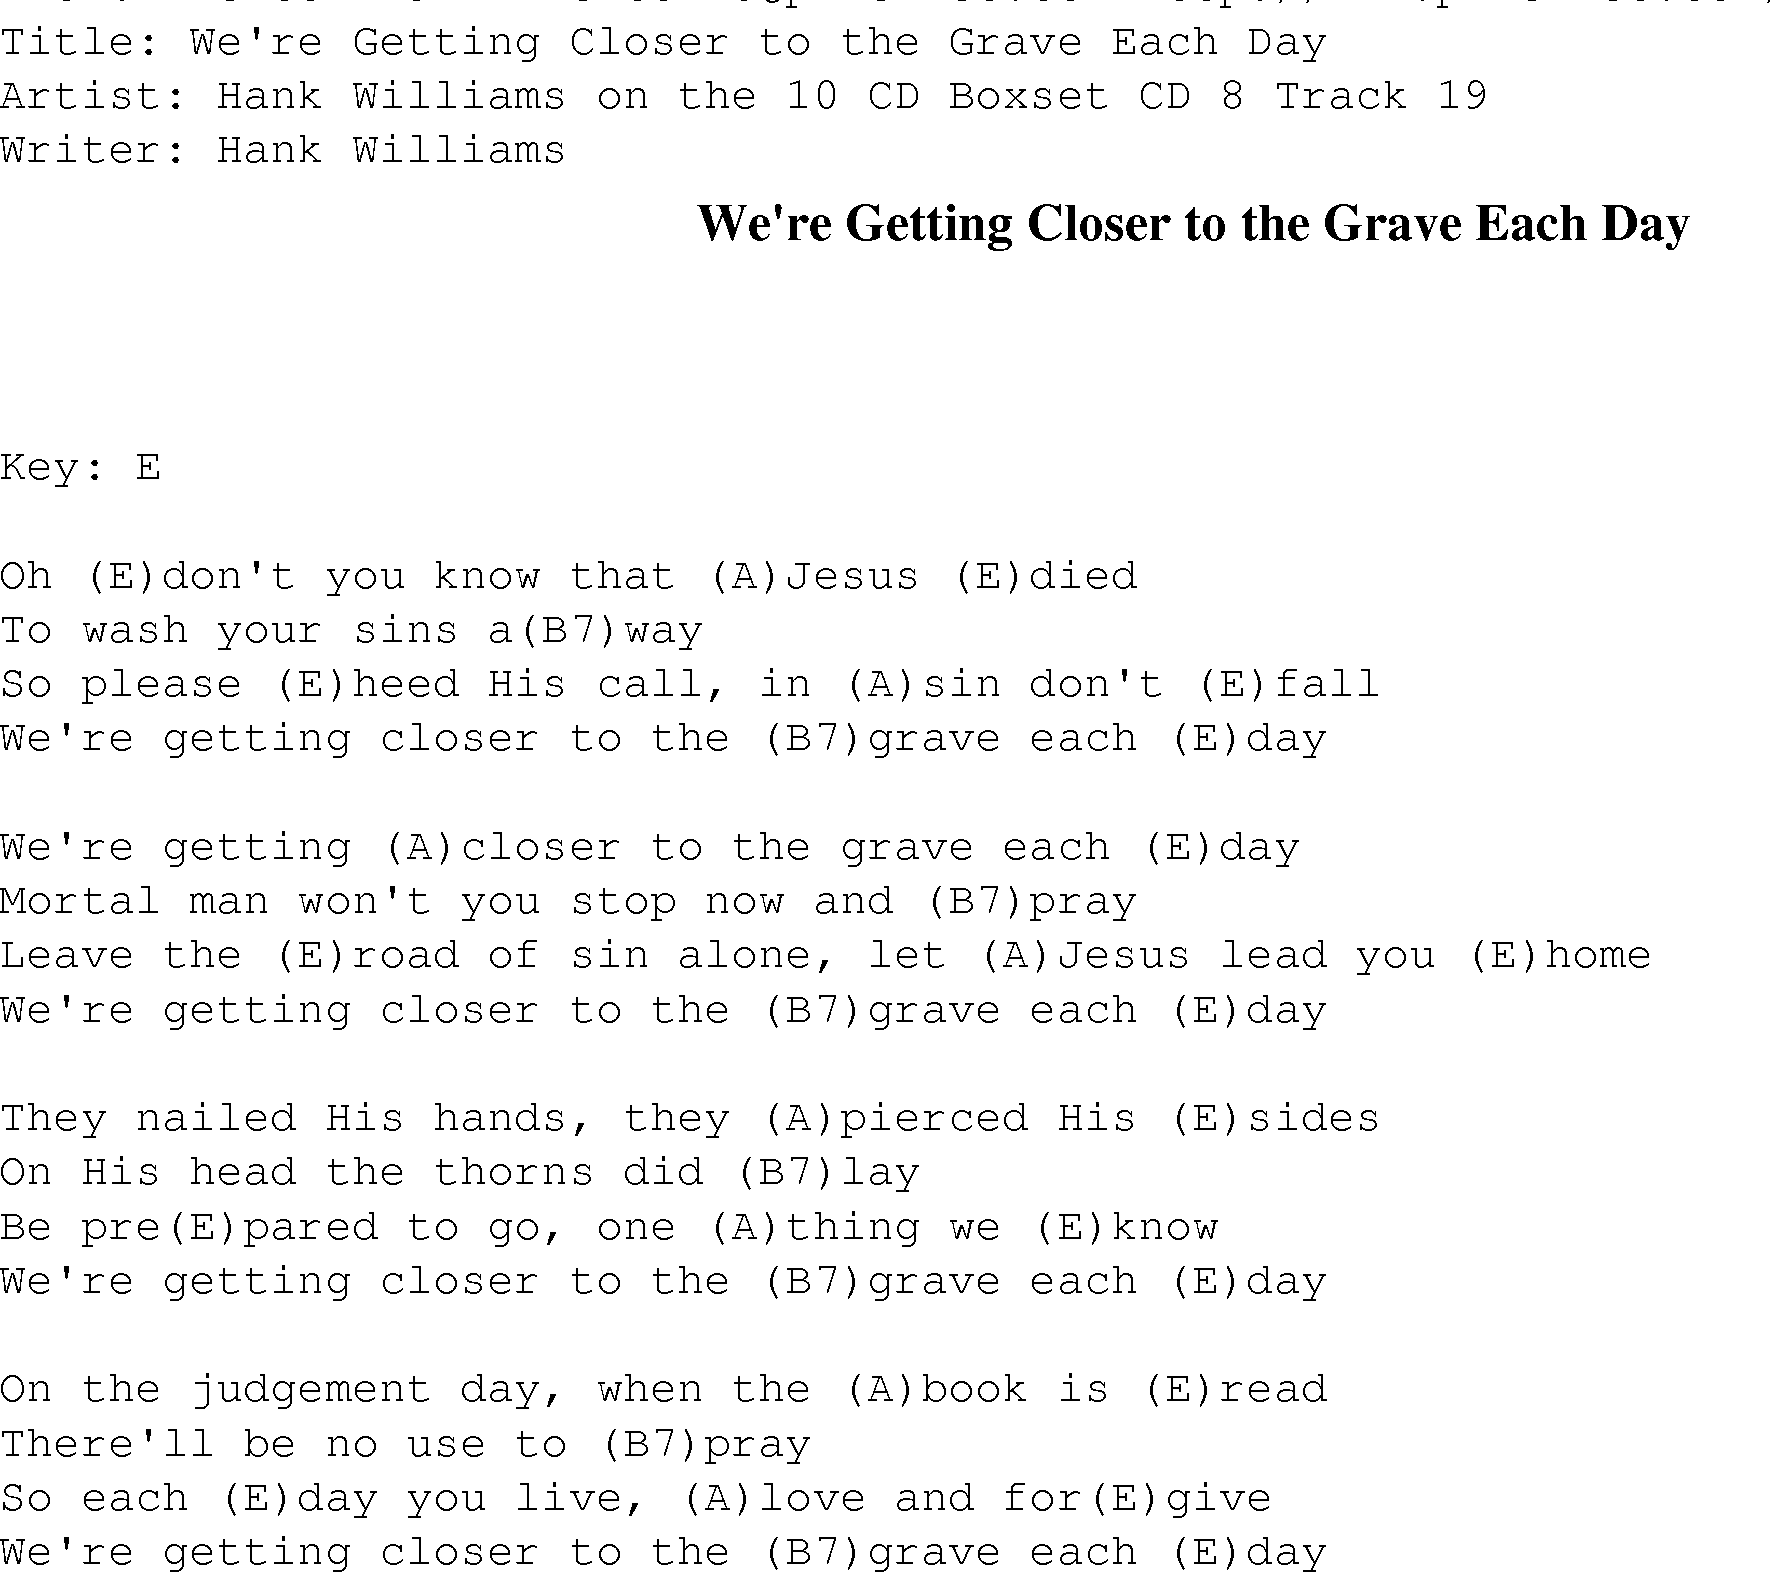 Gospel Song: were_getting_closer_to_the_grave, lyrics and chords.